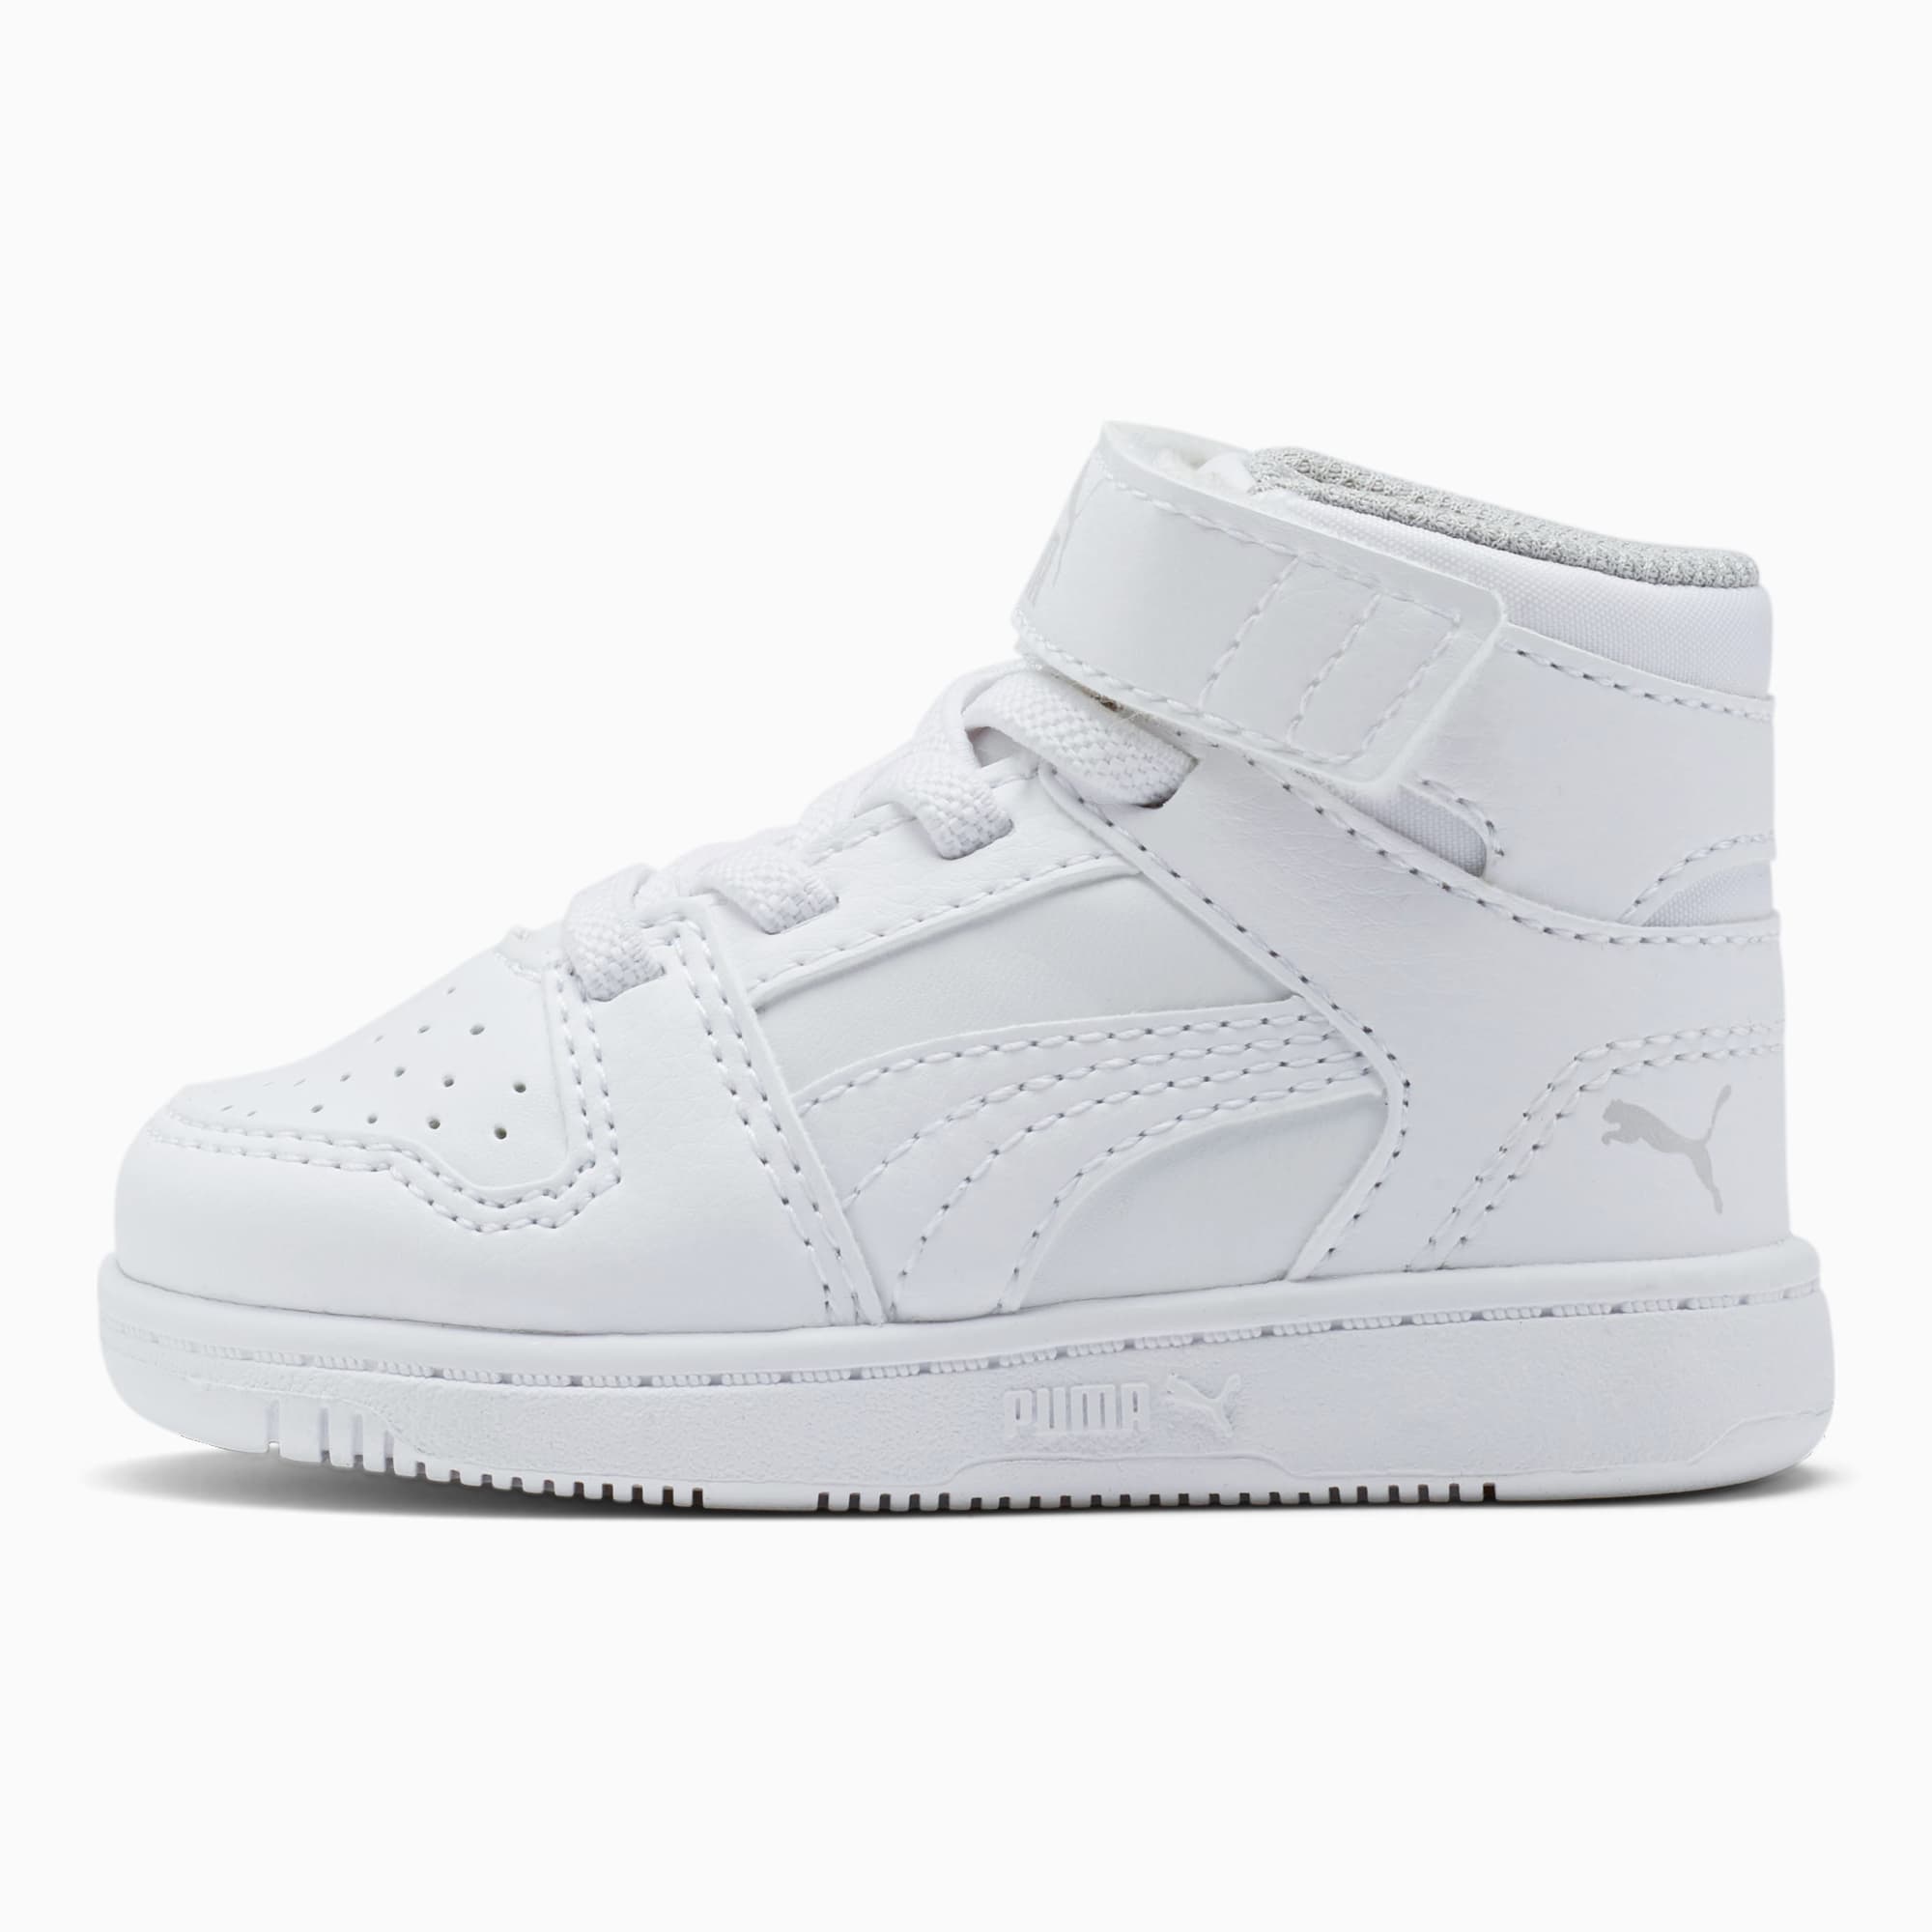 white puma sneakers for toddlers